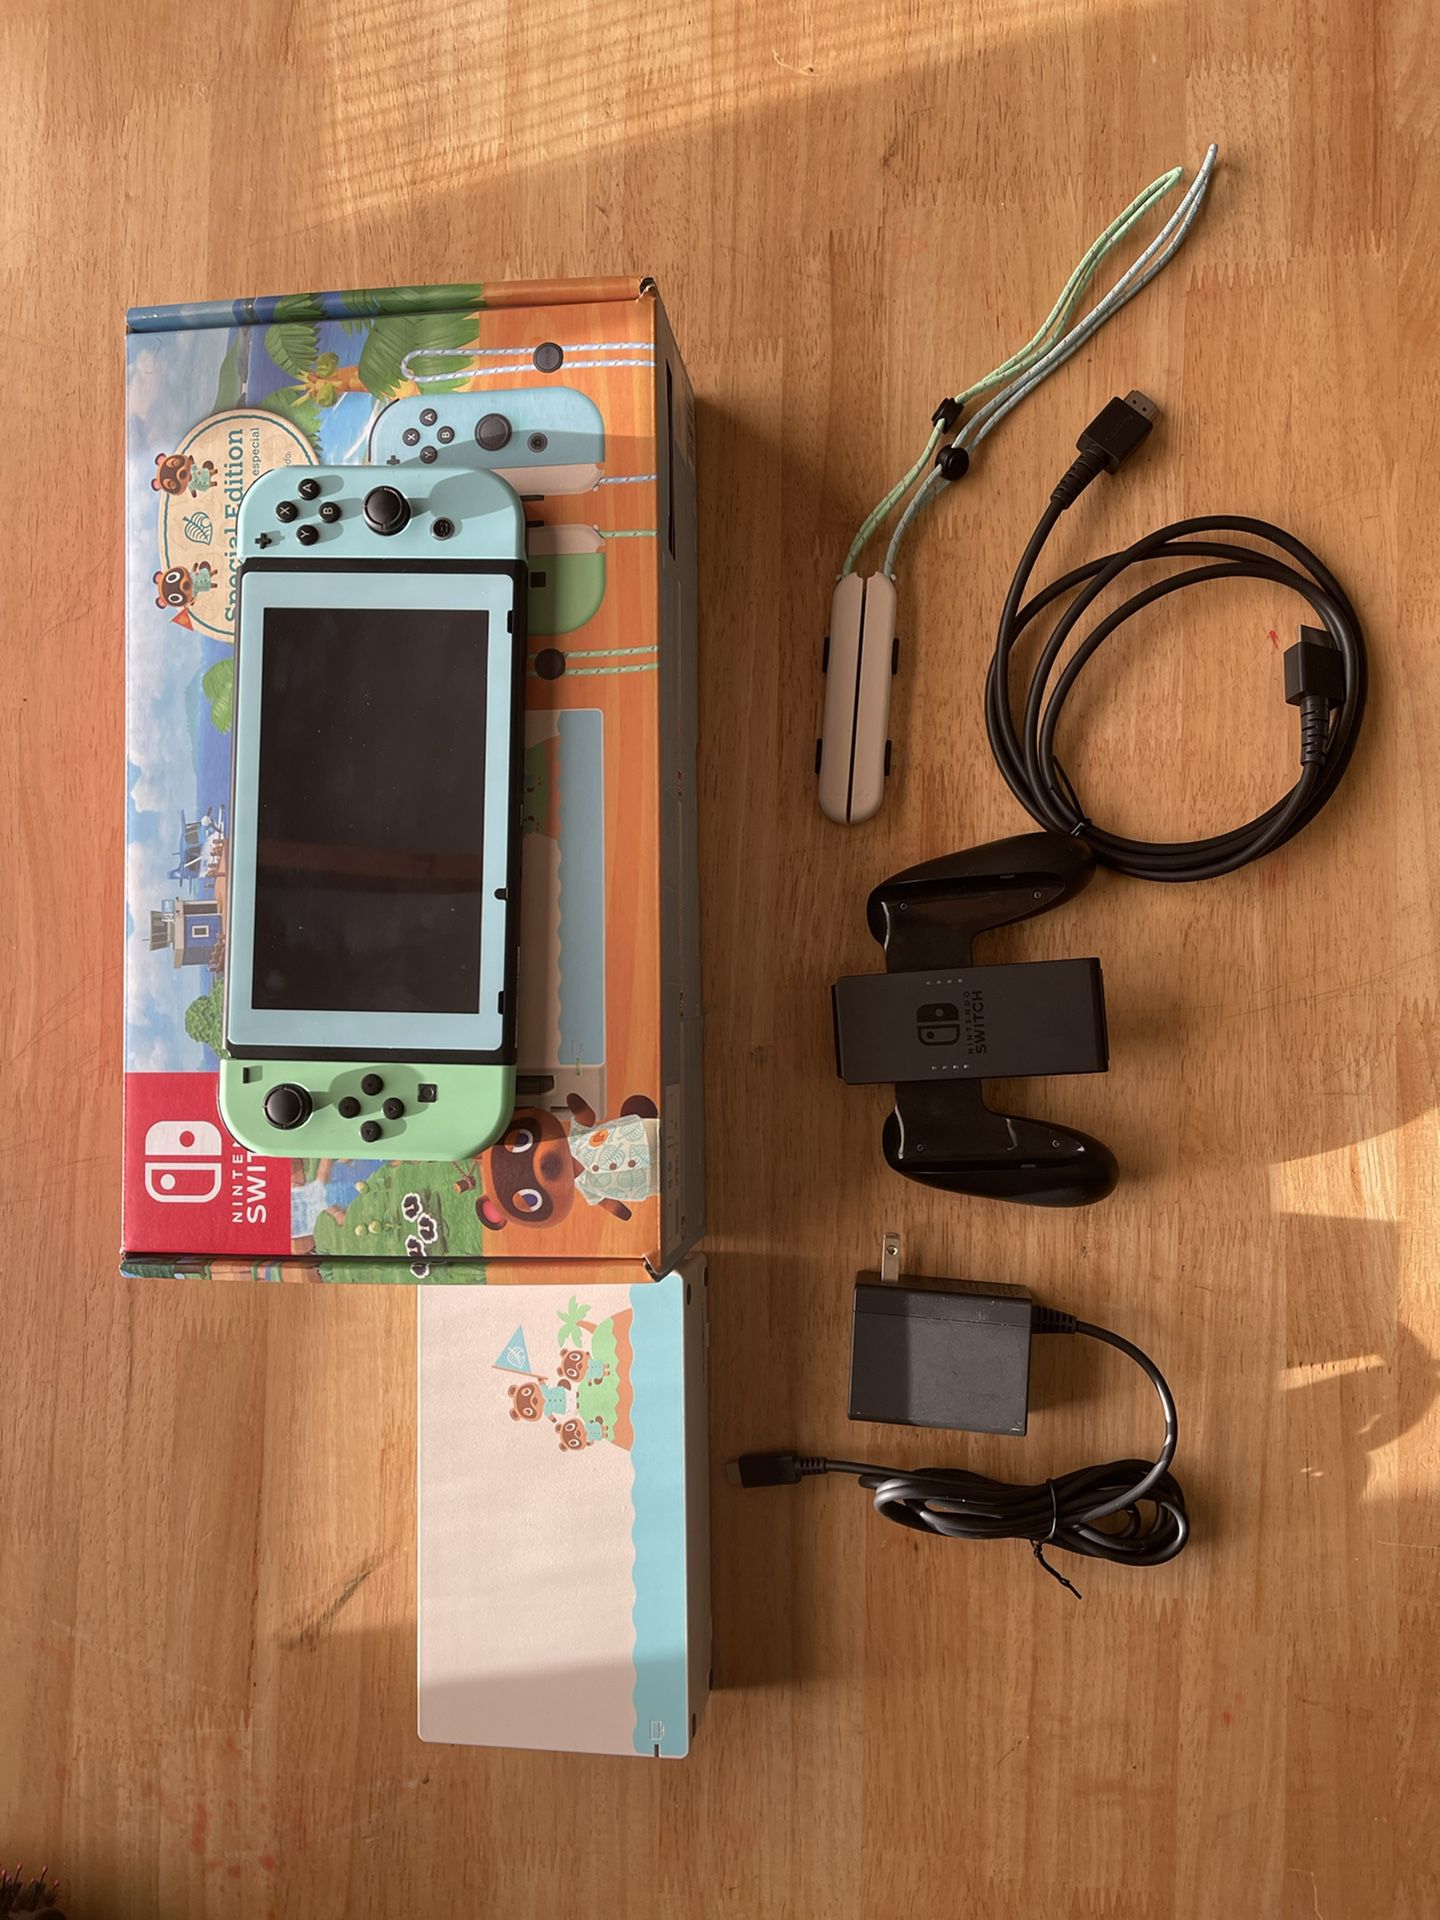 Nintendo Switch Animal Crossing Edition. Game Not Included